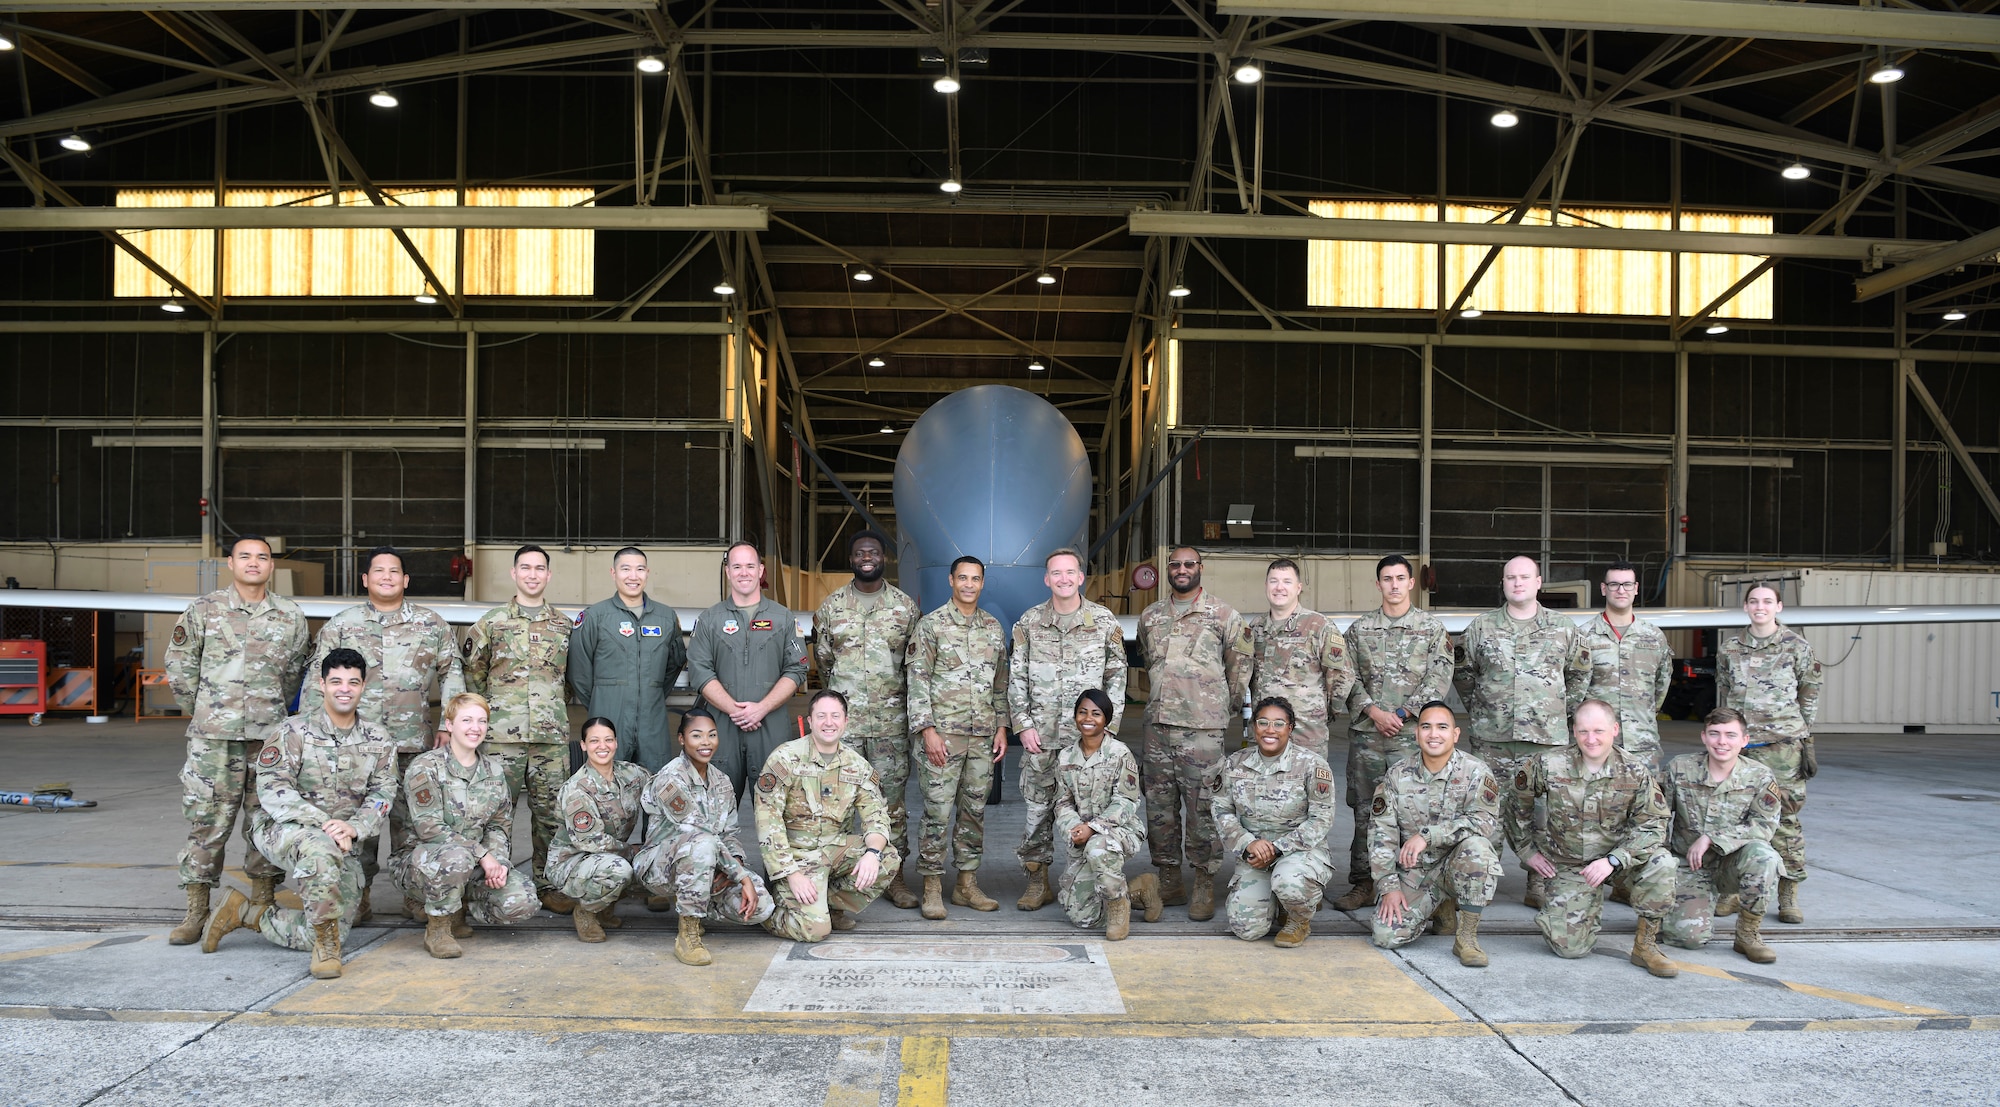 Airmen pose for a group photo in front of an RQ-4 Global Hawk